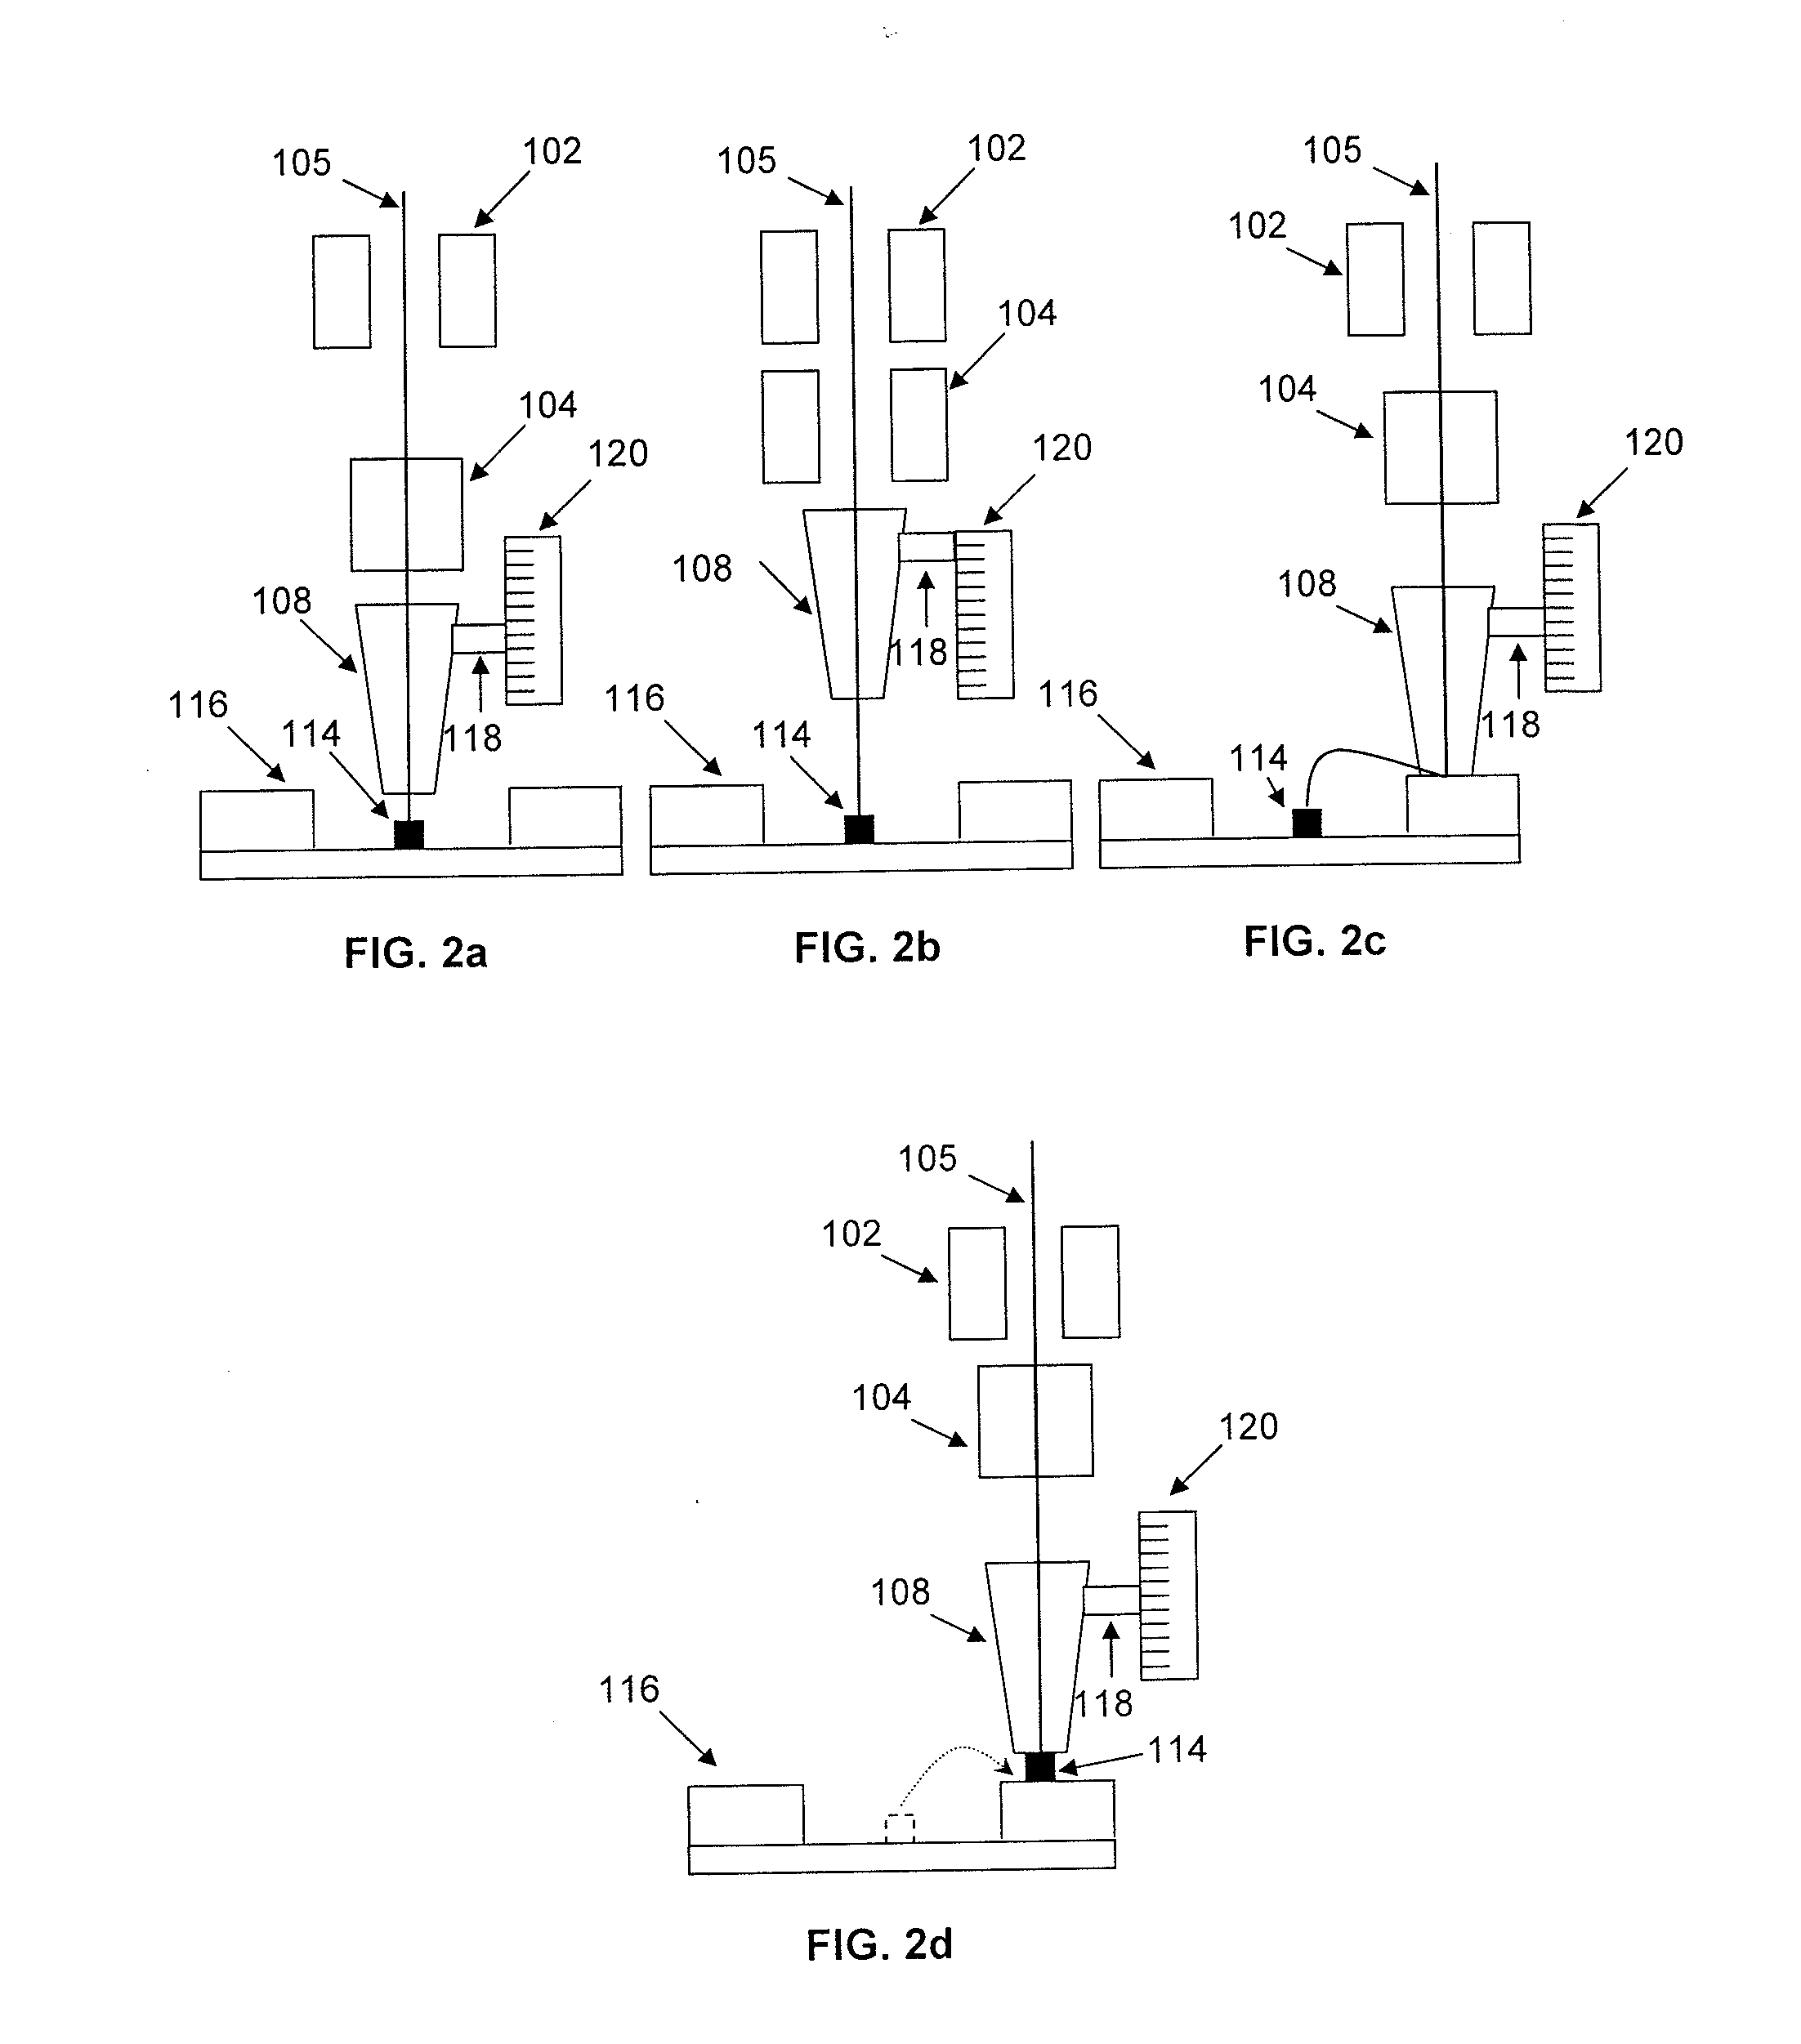 Method of recovering a bonding apparatus from a bonding failure